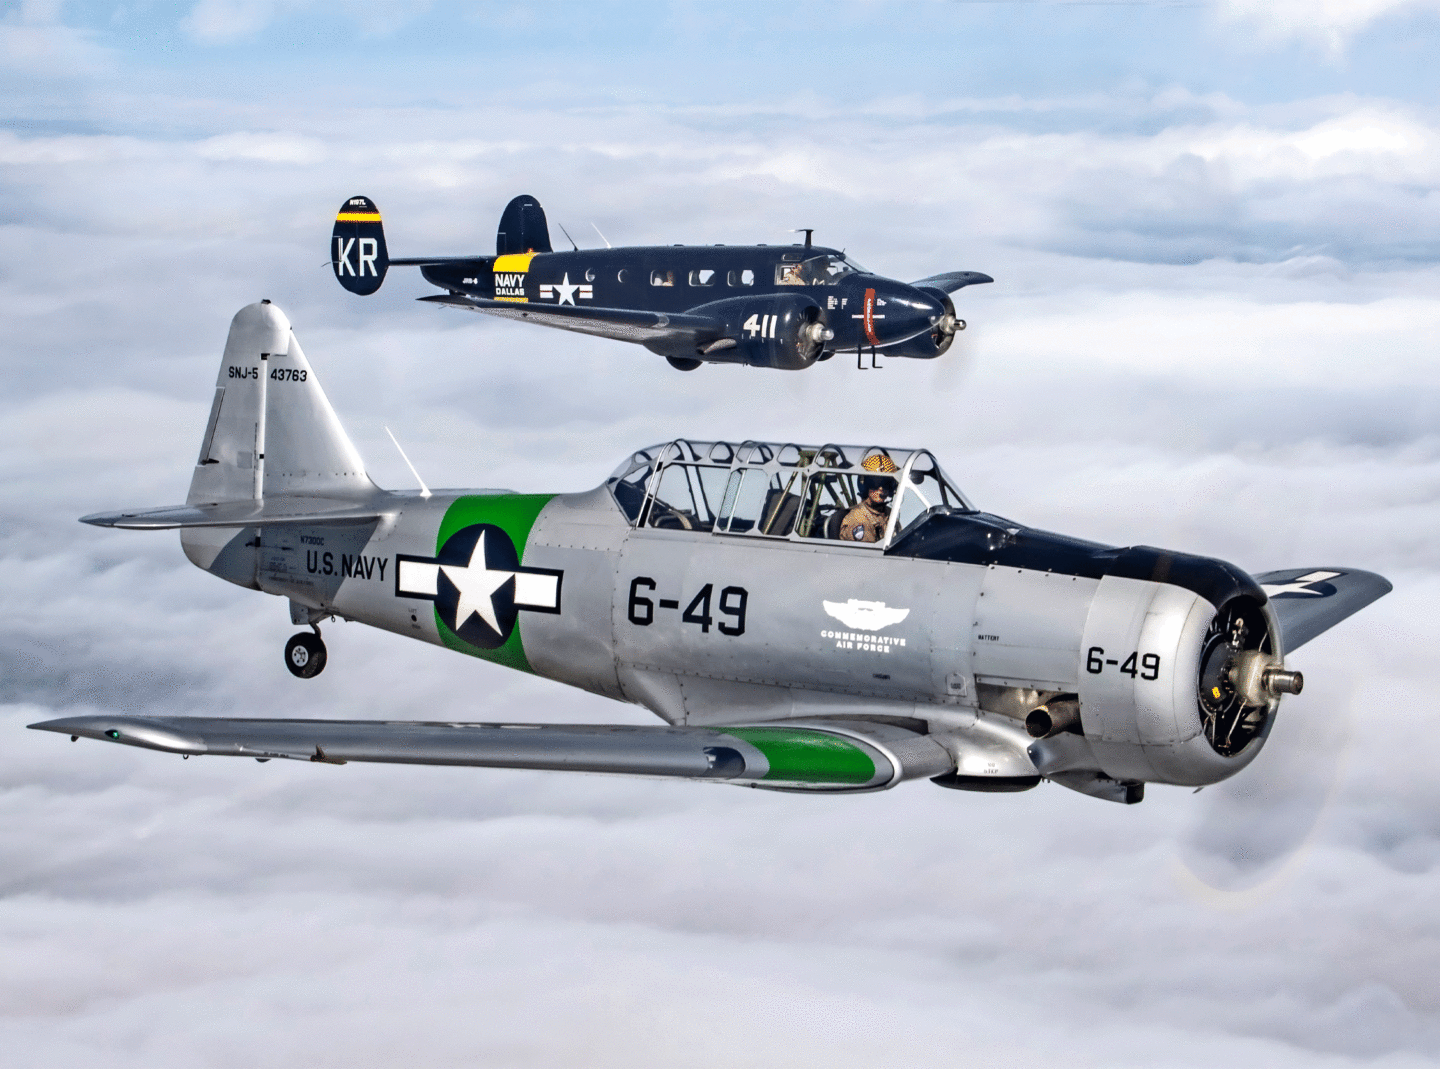 C-45 and SNJ Airplanes flying next to each other